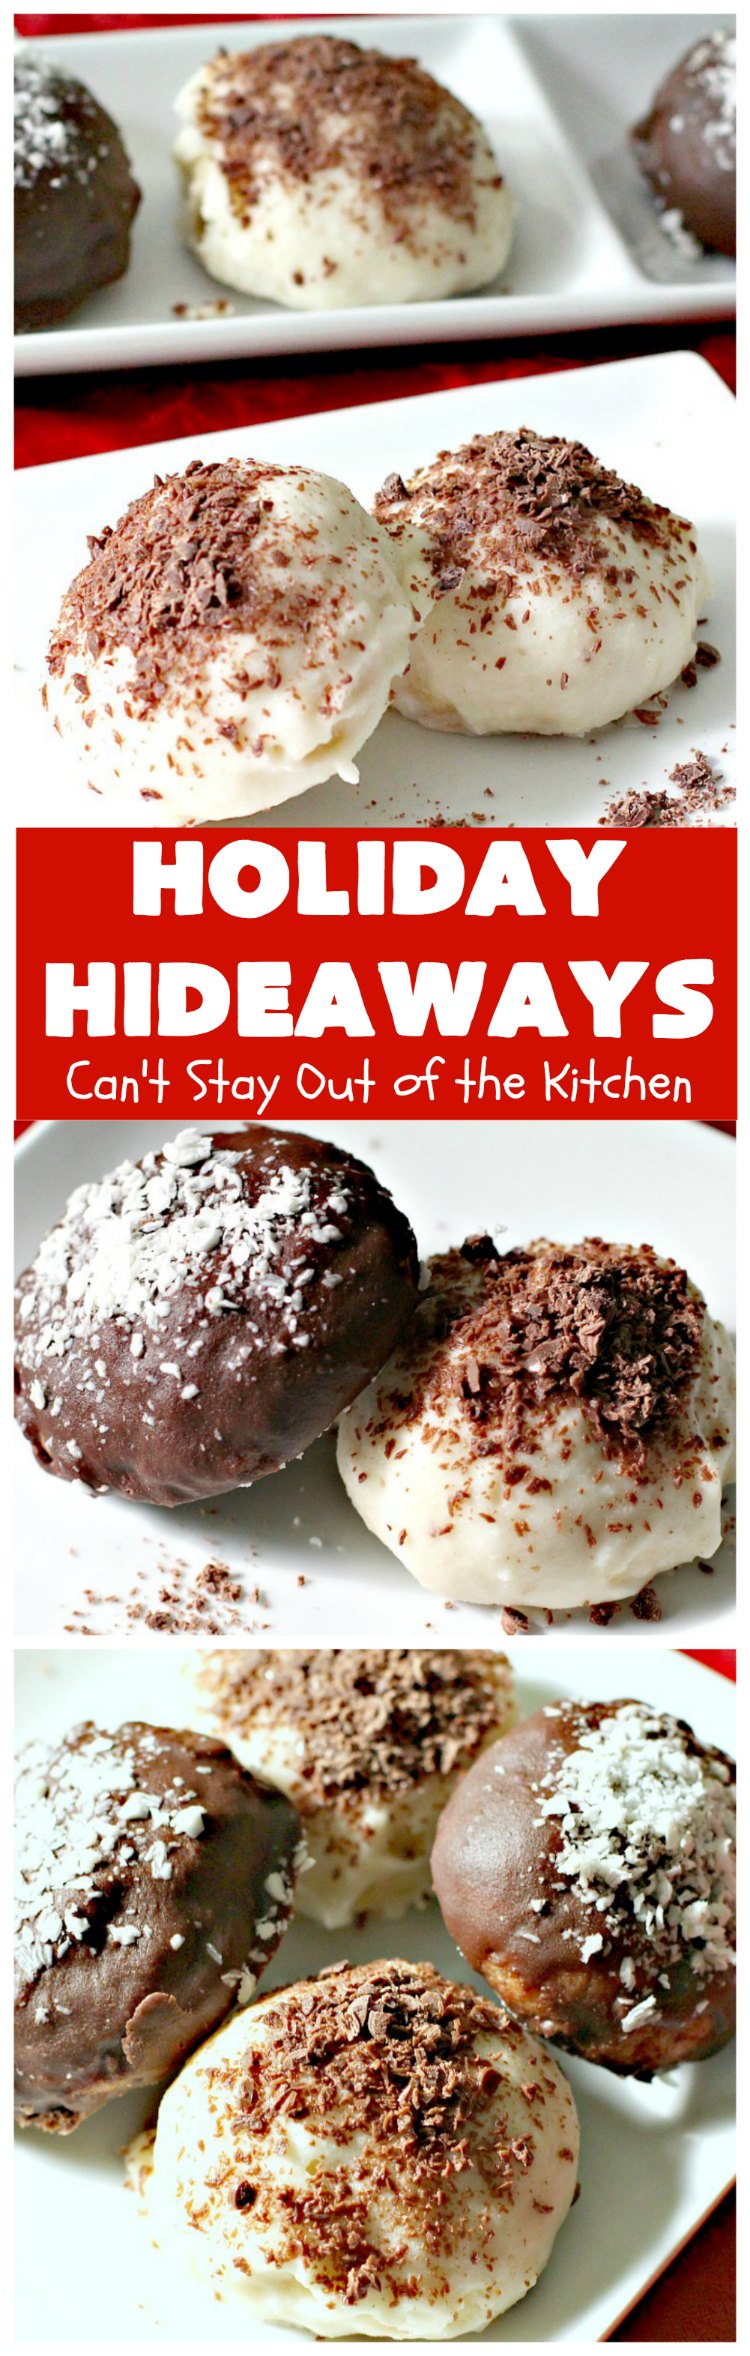 Holiday Hideaways | Can't Stay Out of the Kitchen